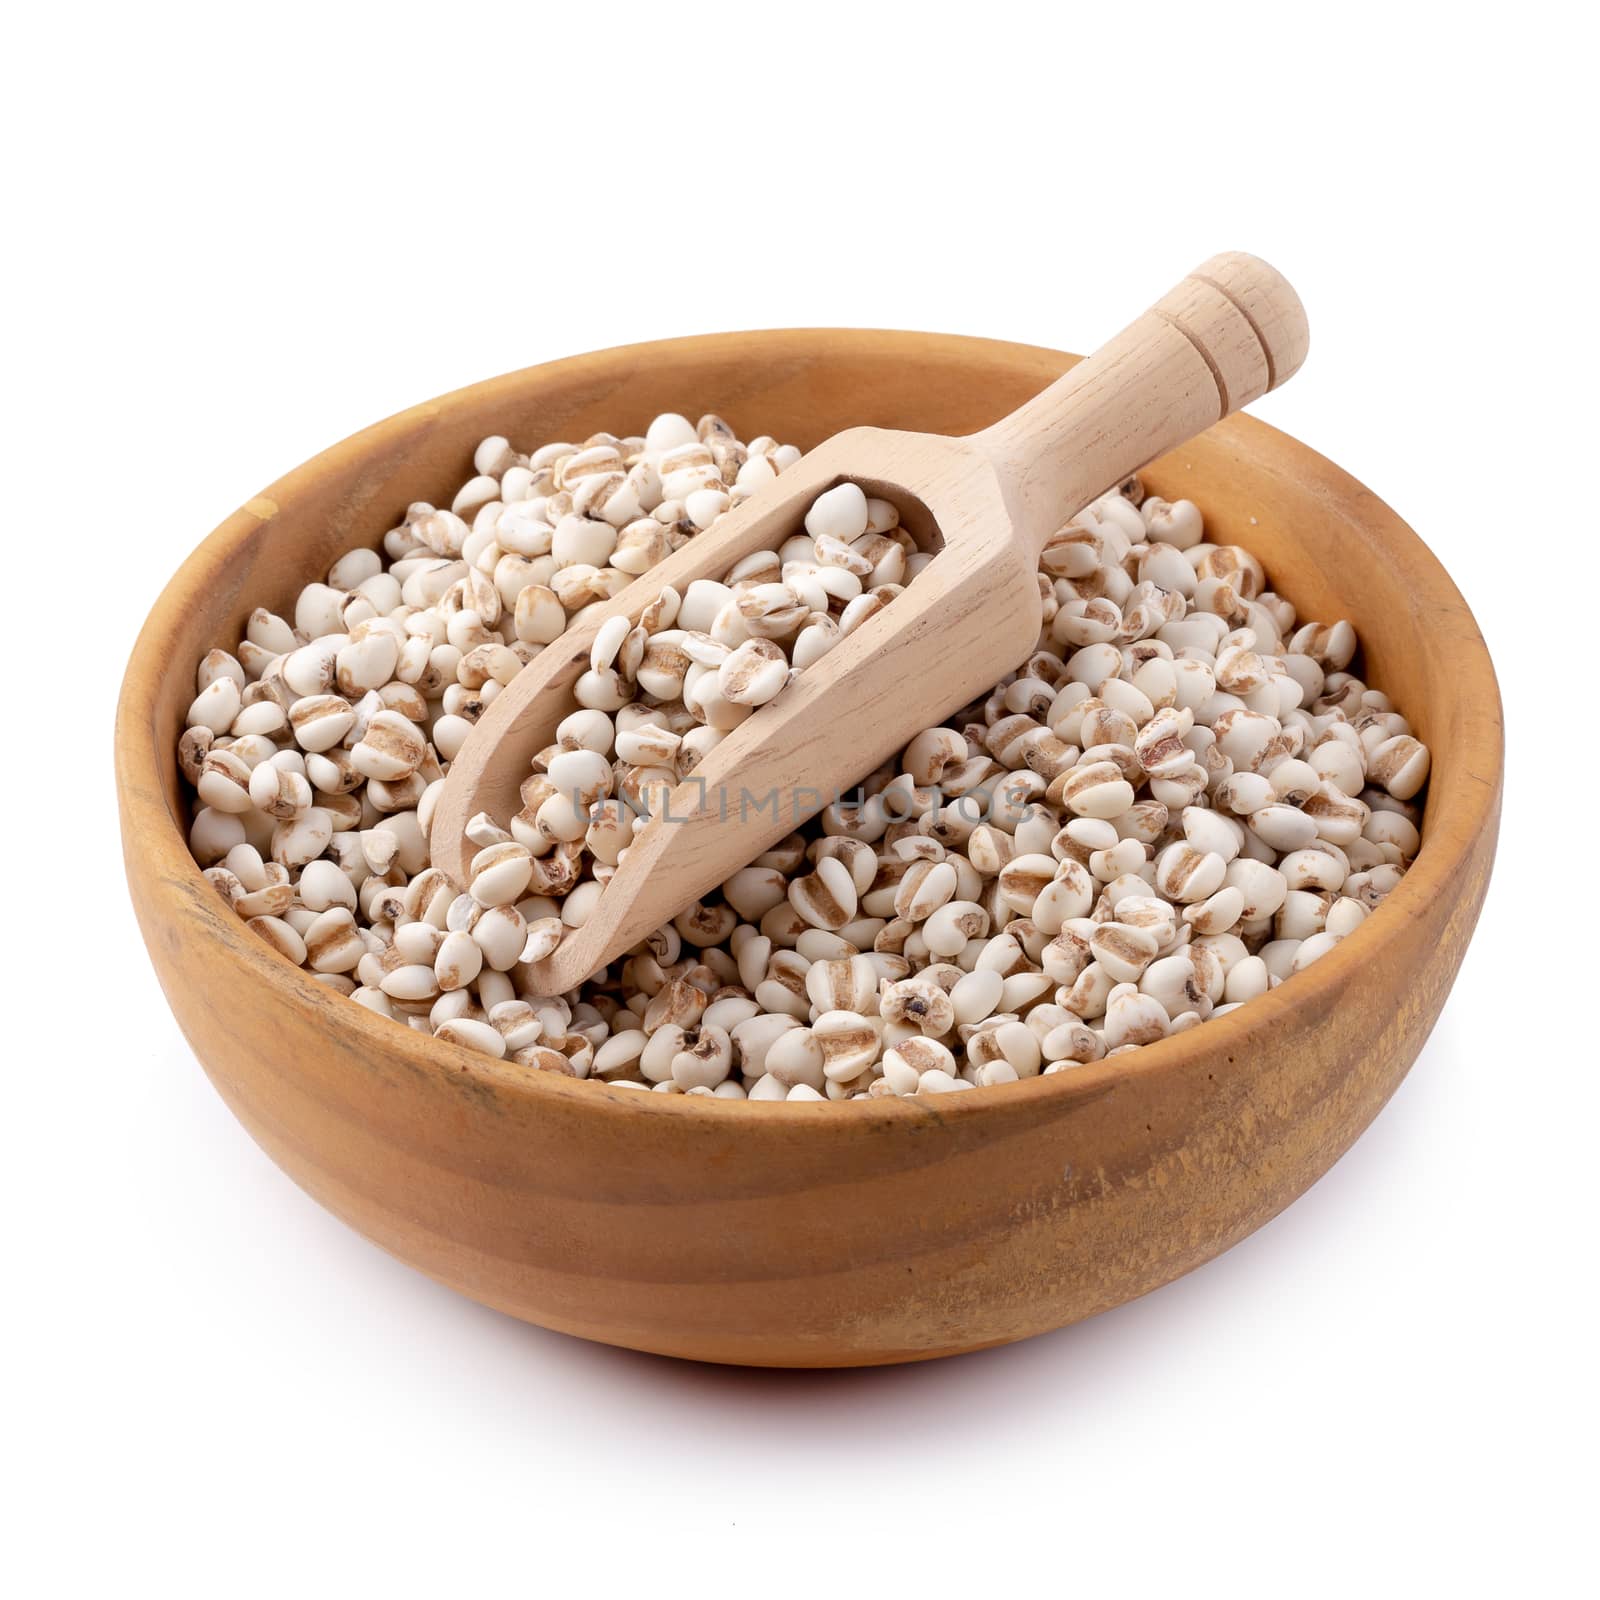 Millet rice in a wooden bowl isolated on white background.